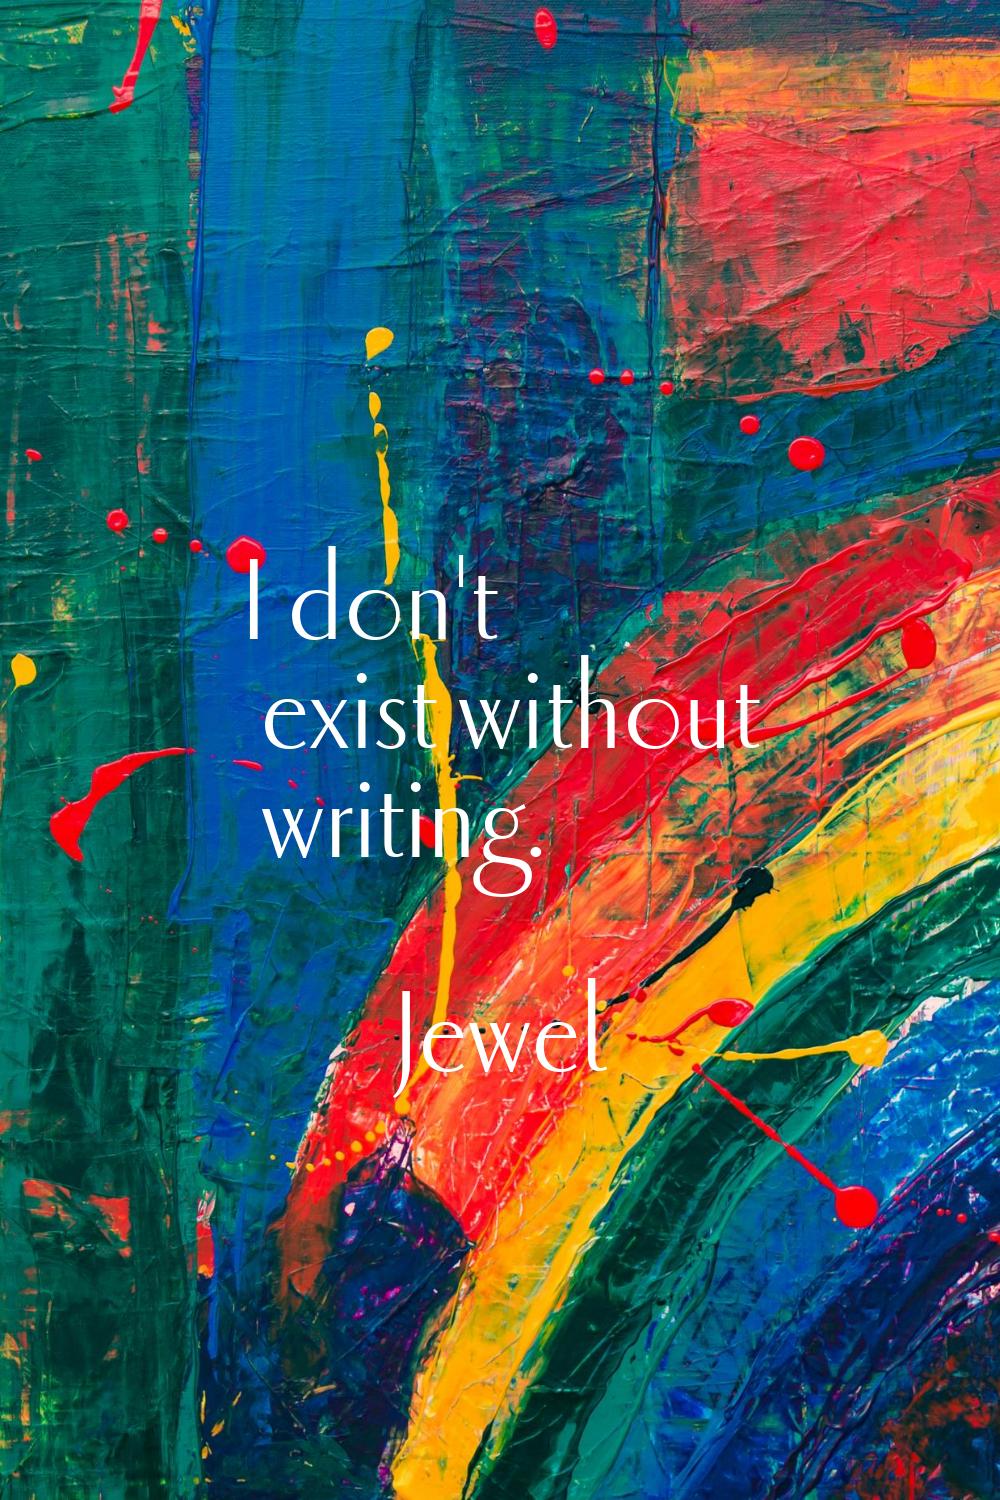 I don't exist without writing.